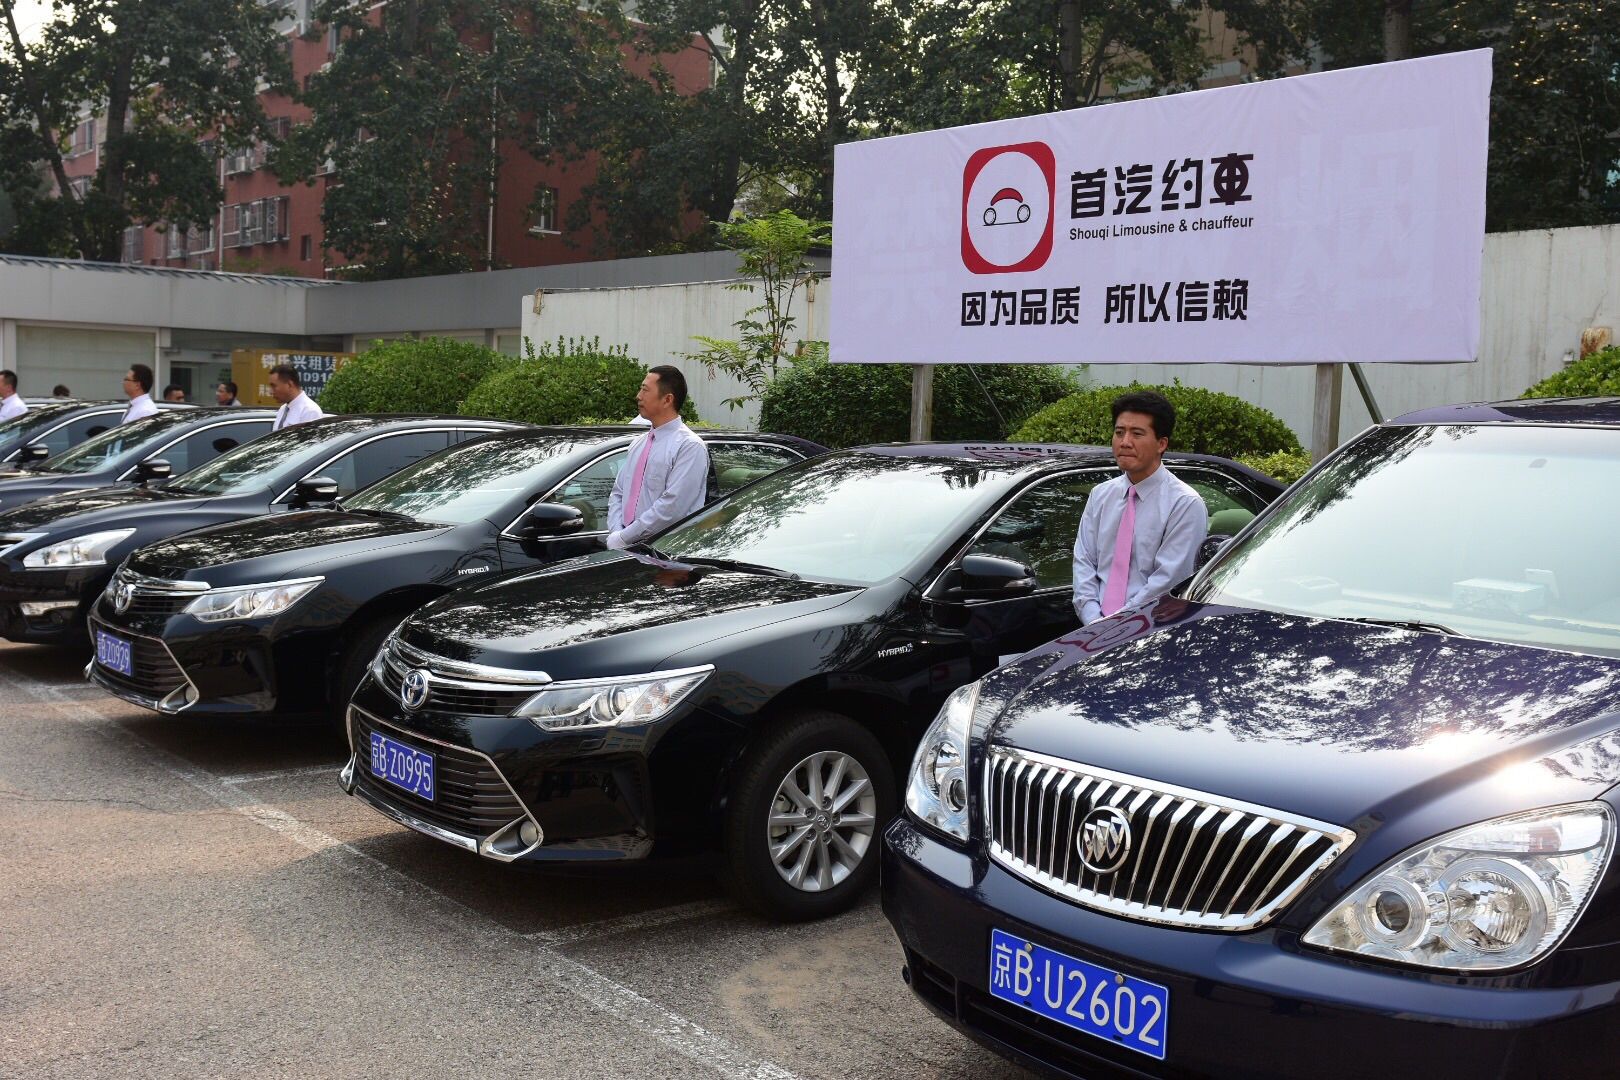 Beijing Launches First Government Authorized Chauffeured Car Services APP